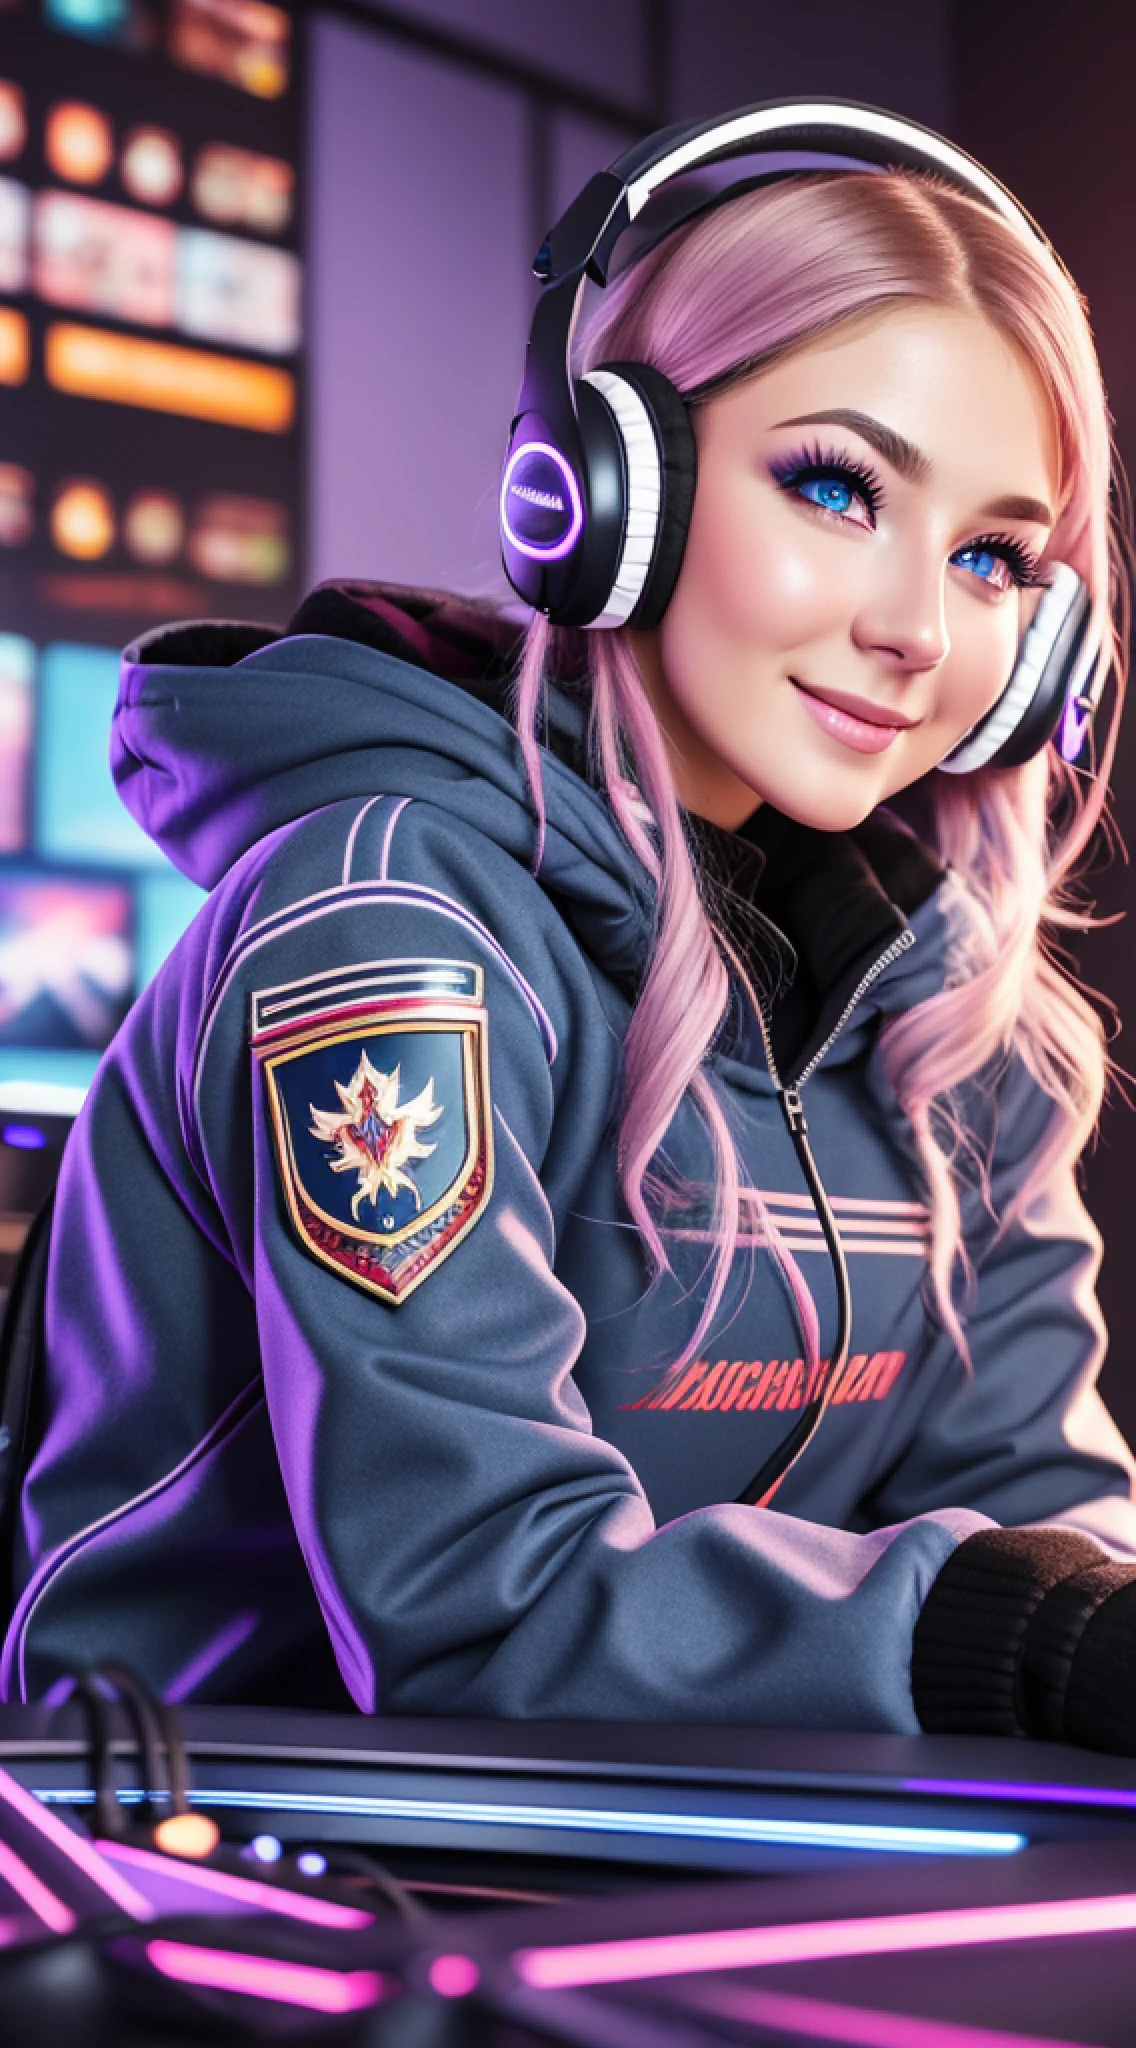 best quality, ultra high resolution,beautiful face, at night, natural makeup, | (perfect anatomy) , (perfect eyes)1 woman russia , gamer clothing winter coat e-sports team uniform, intricate design, headset, | Sitting in the gaming chair, back of the games room in a room at night, streamer, player, gaming PC, (room at night) . smile